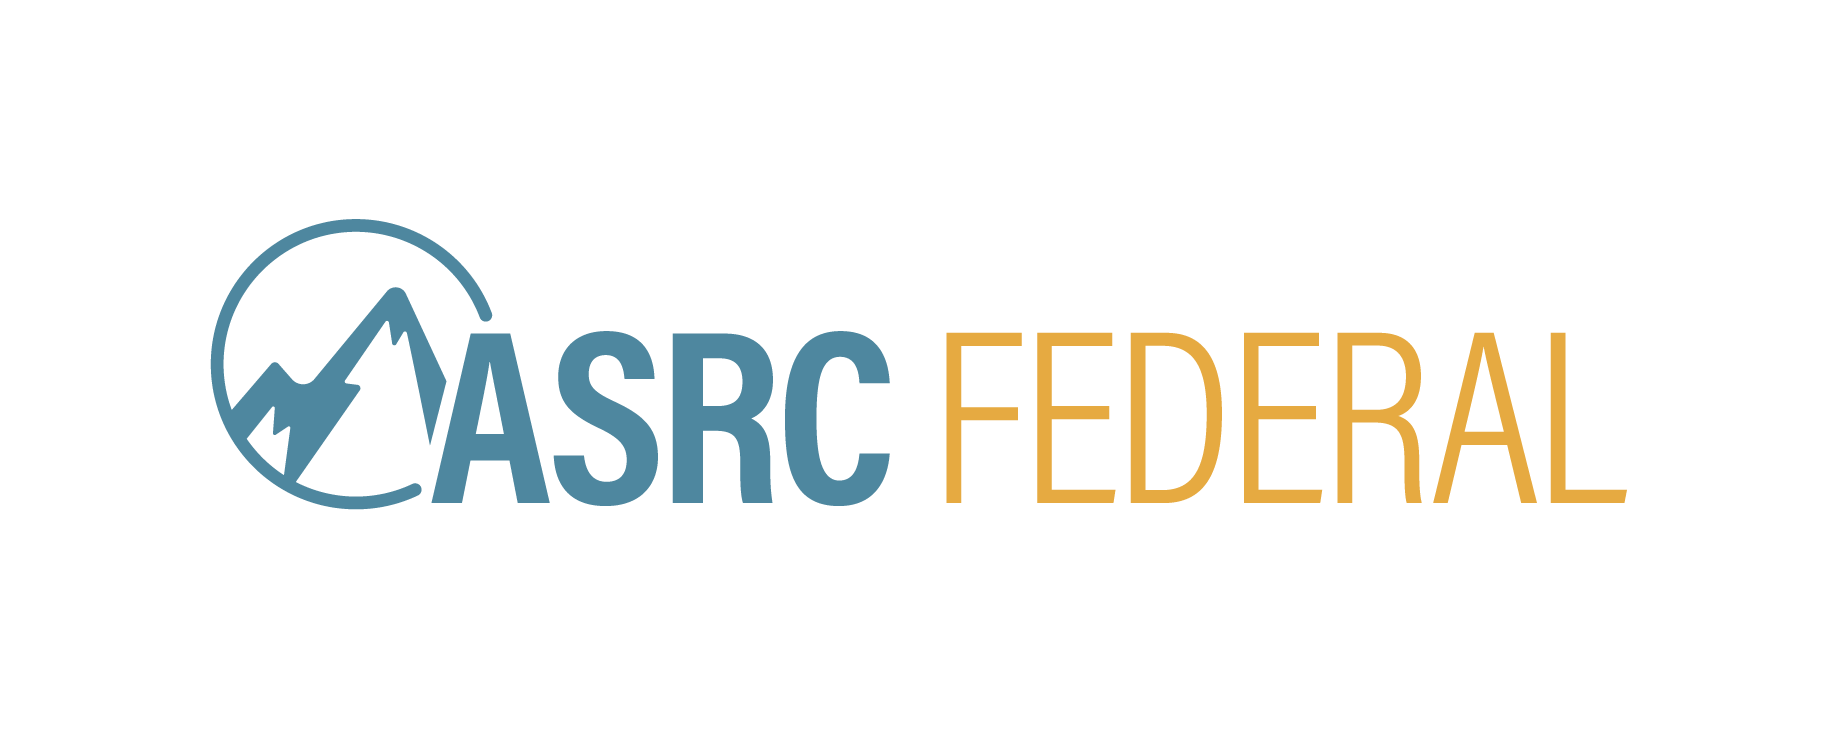 jobs in Asrc Federal